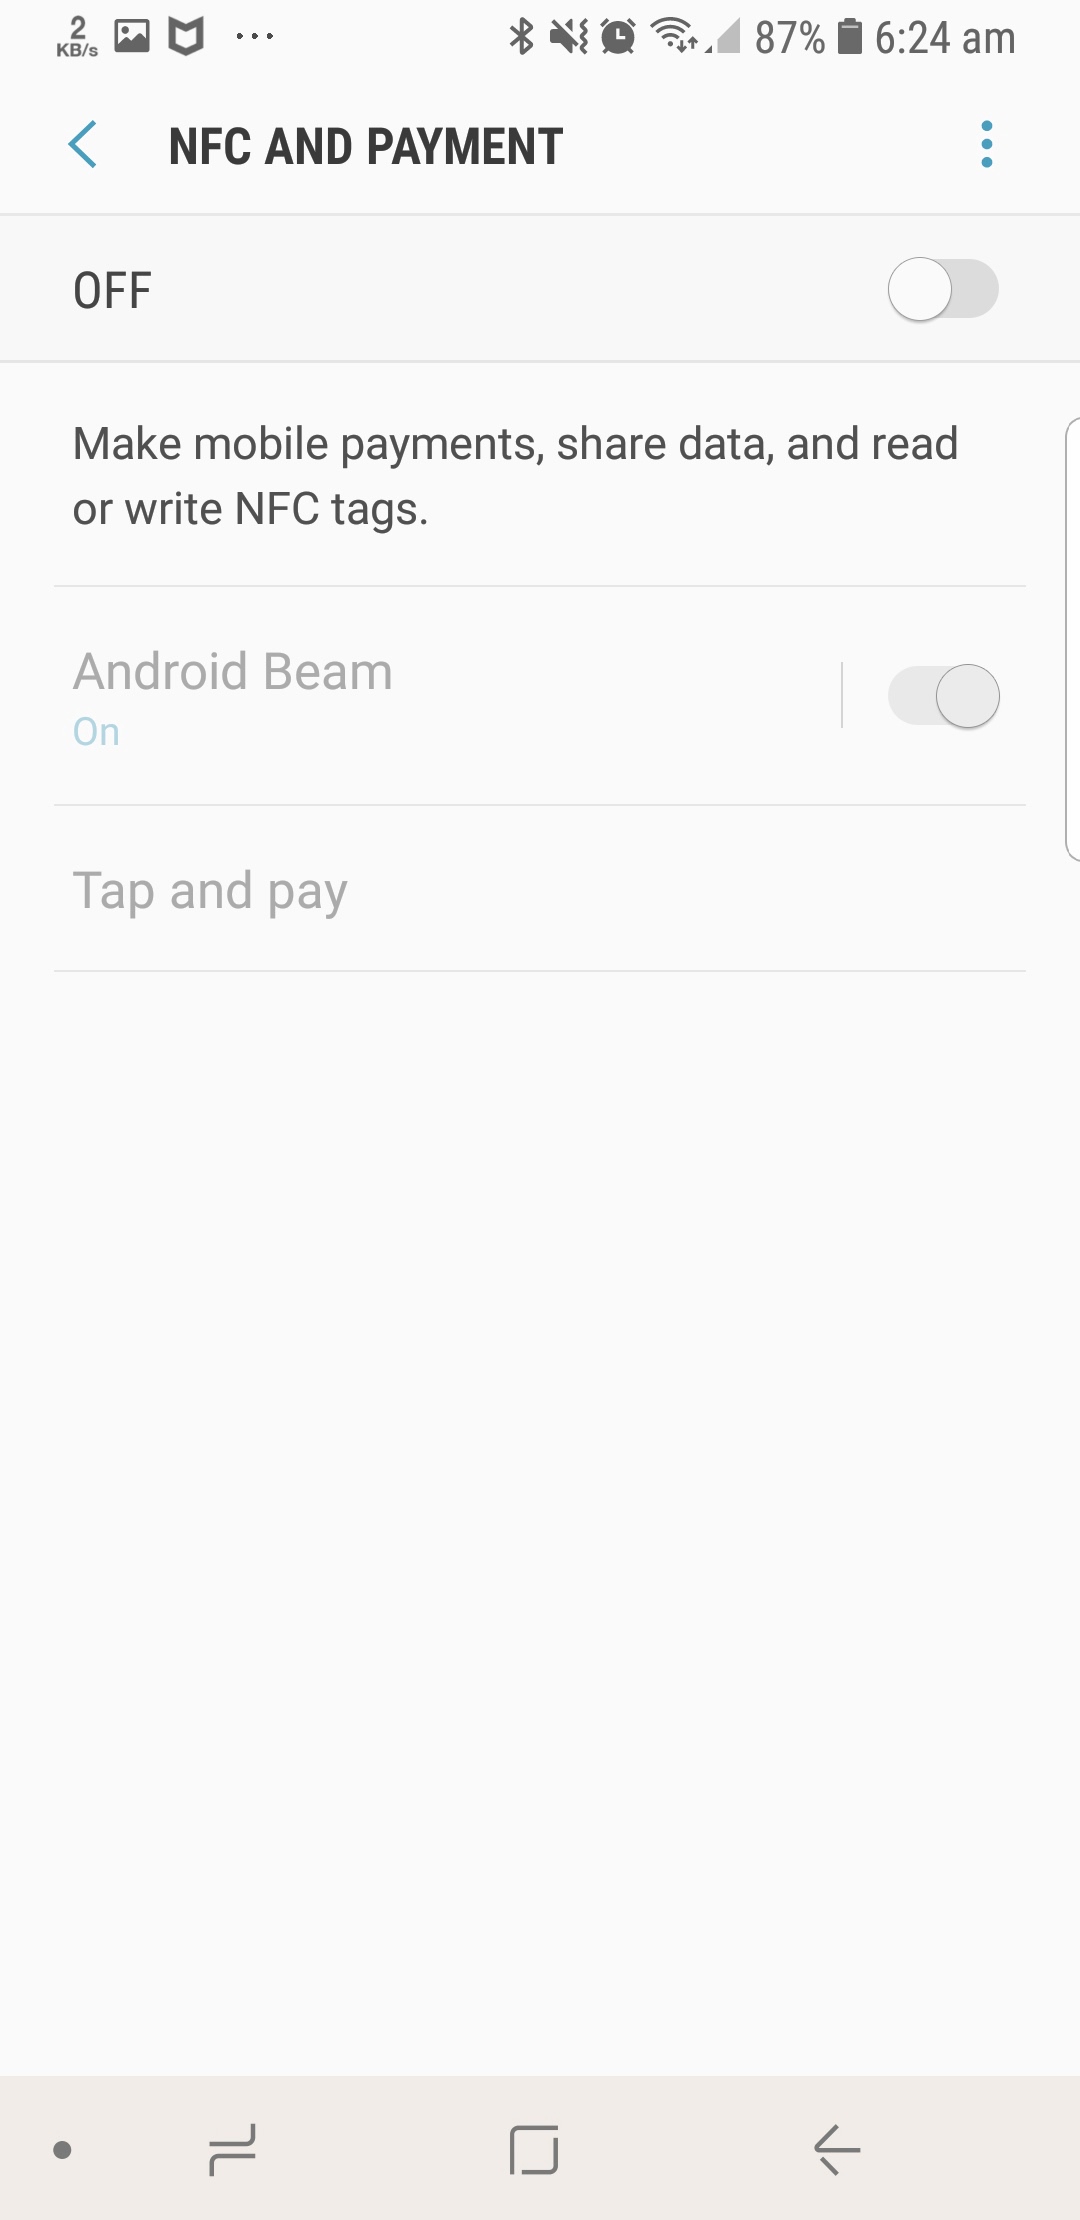 Disable NFC and Android Beam